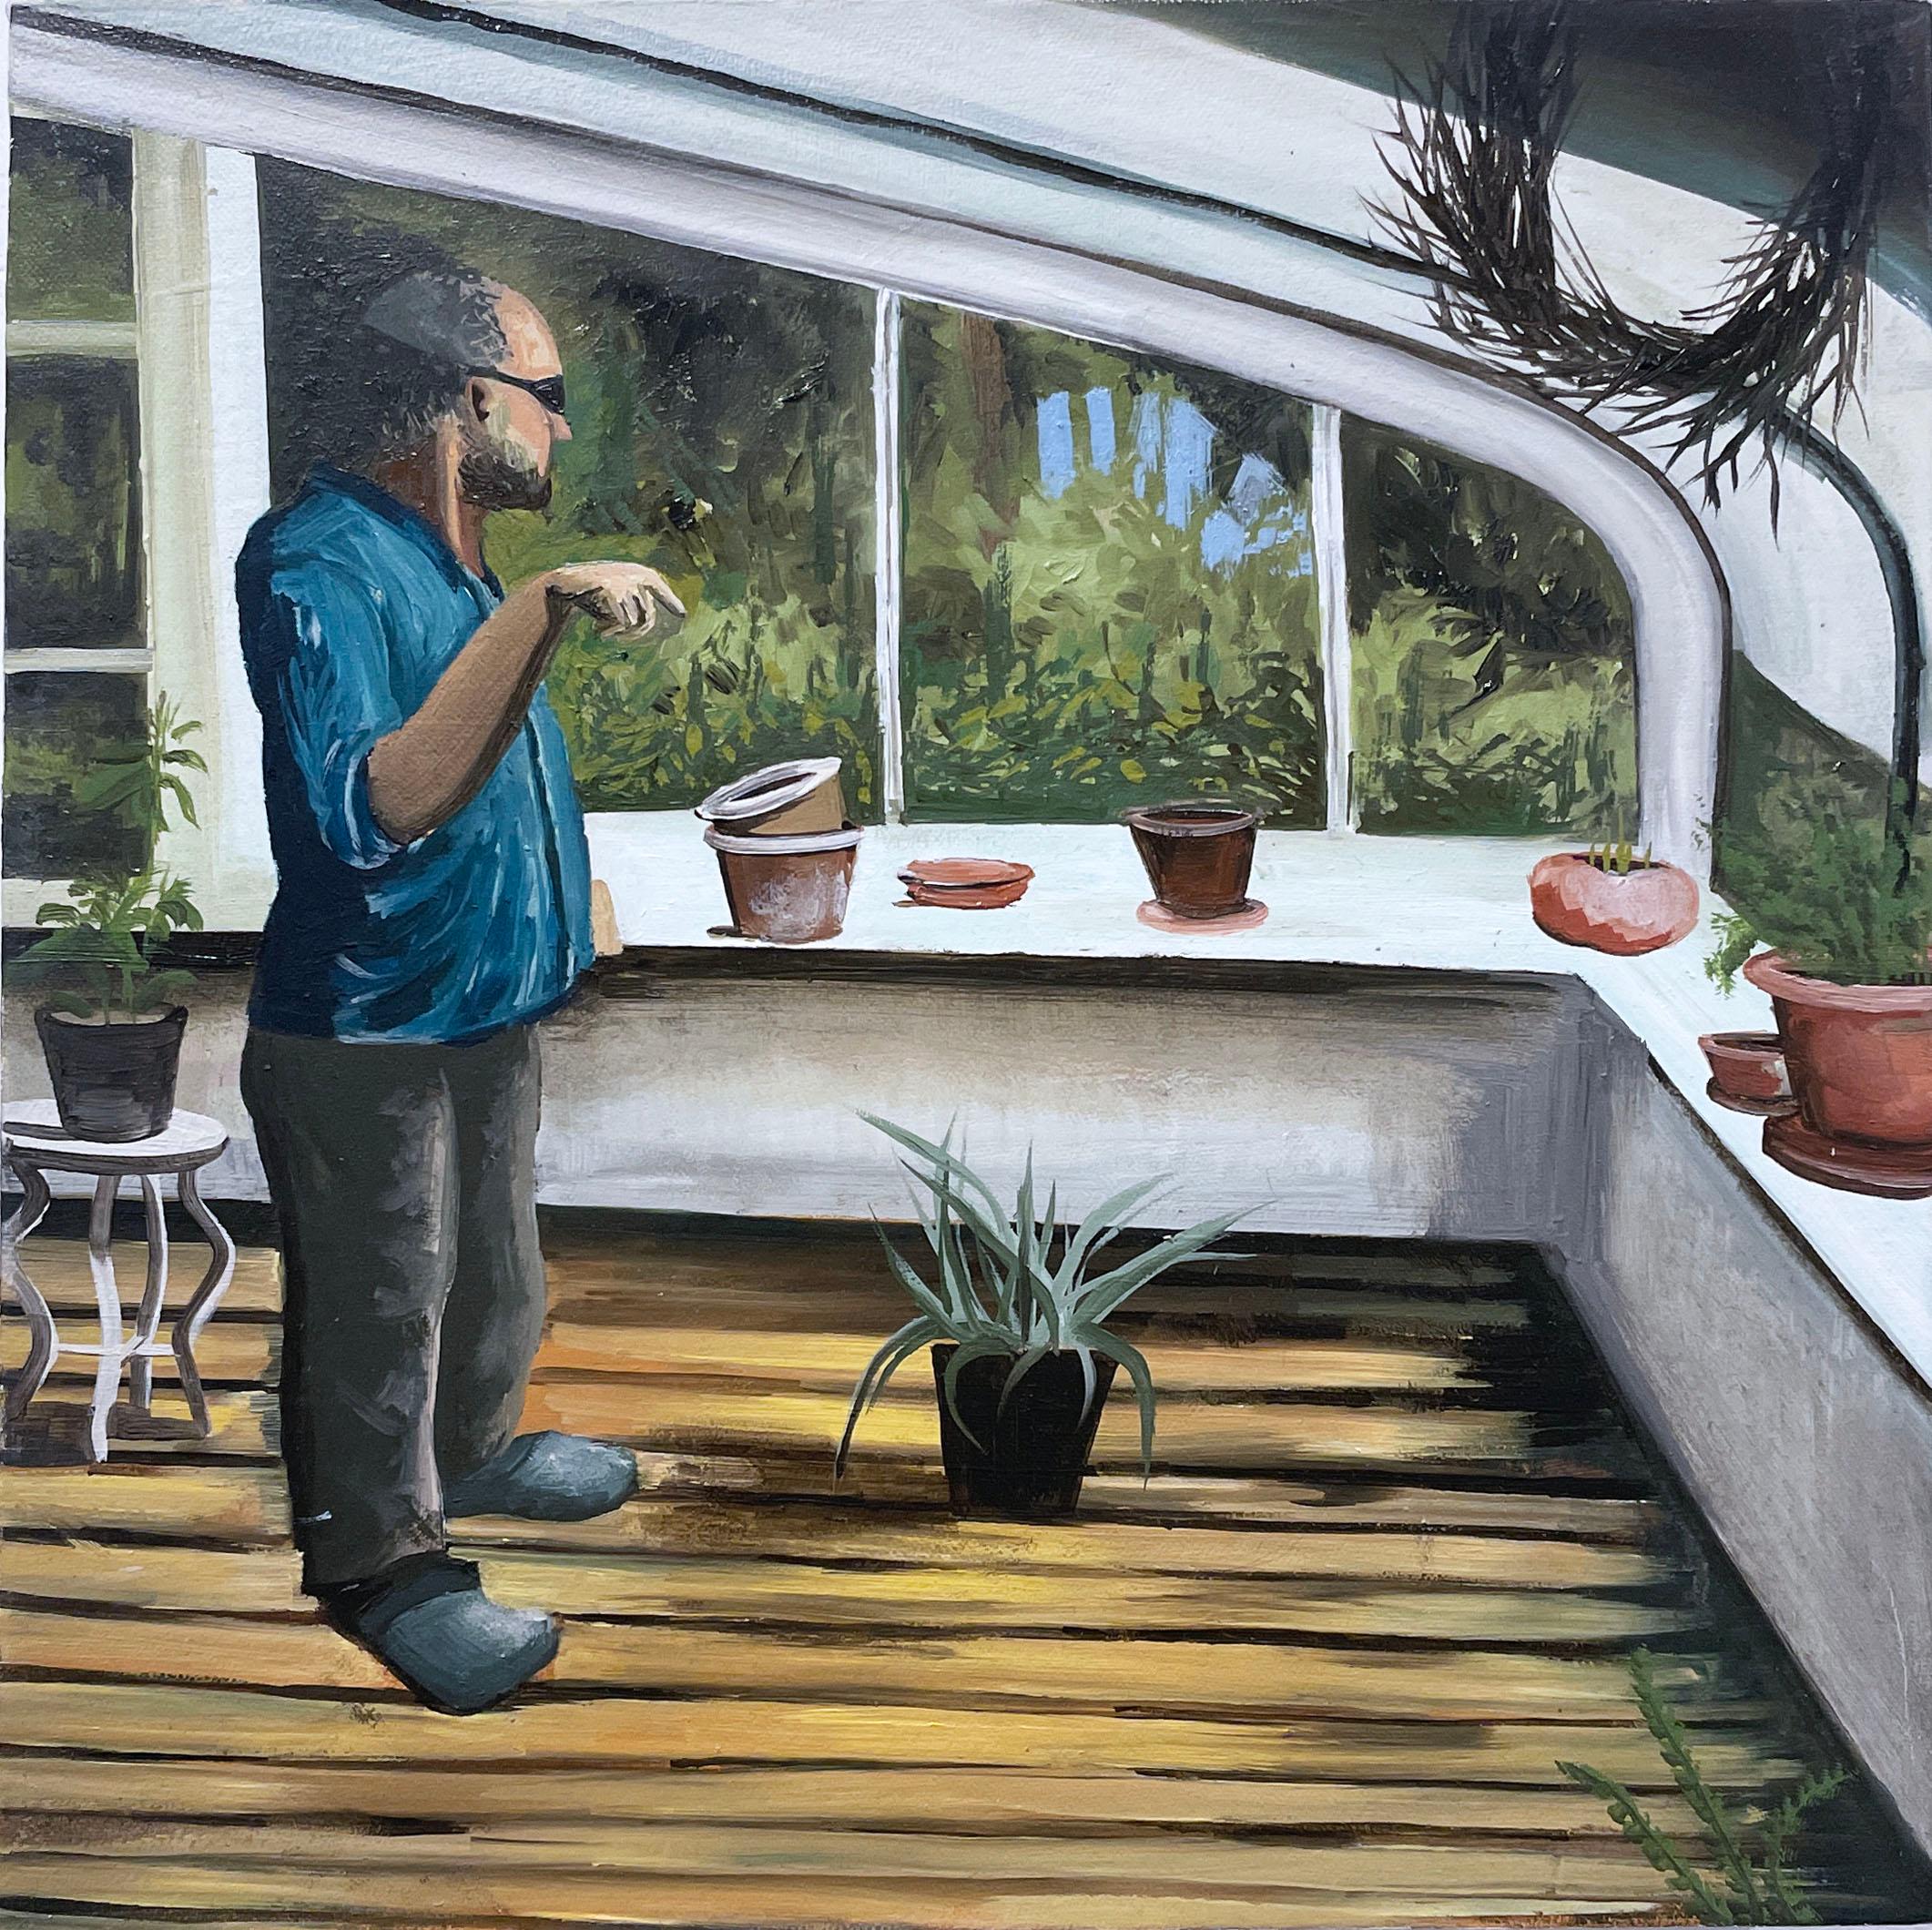 Green Room (2022), oil painting on canvas, earth tones, interiors, greenhouse, windows, human figure, potted plants, wooden floor

